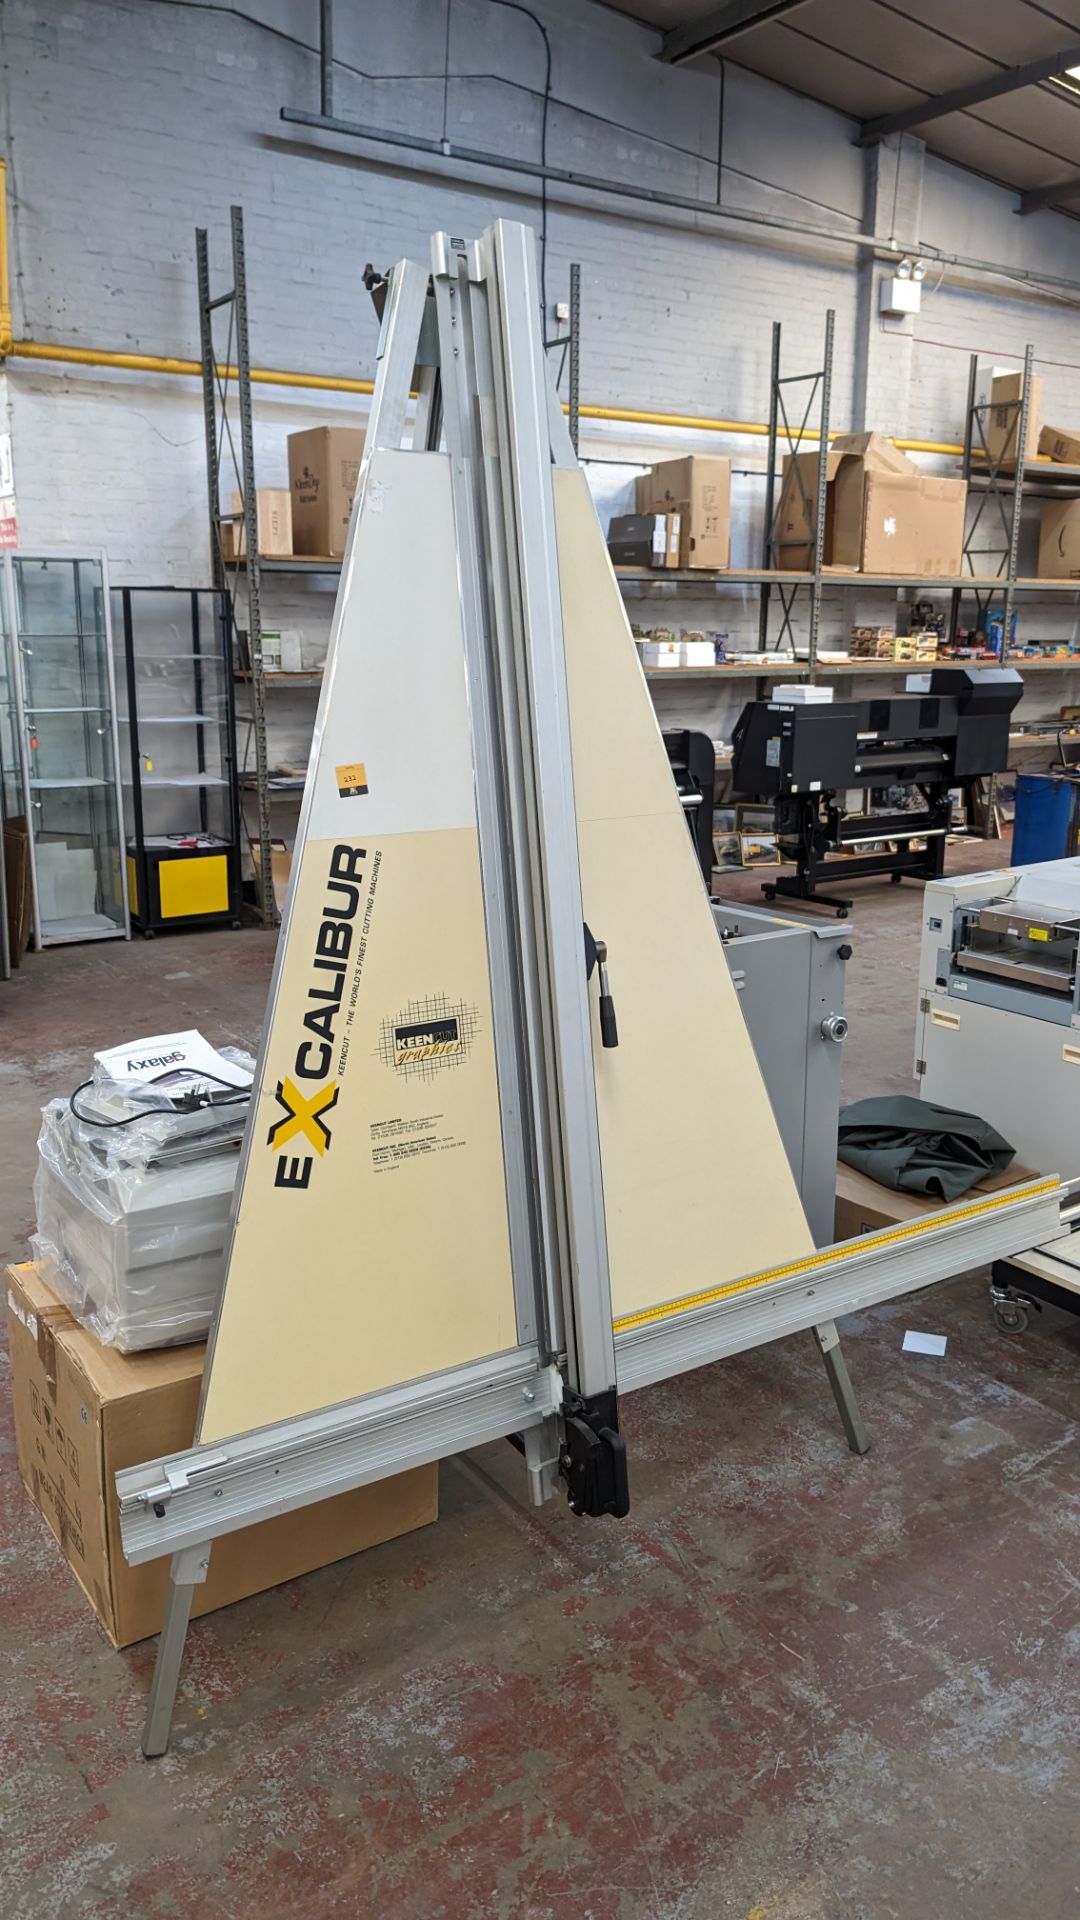 Keencut Graphics Excalibur A frame cutter. Height approximately 2330mm, max width including measuri